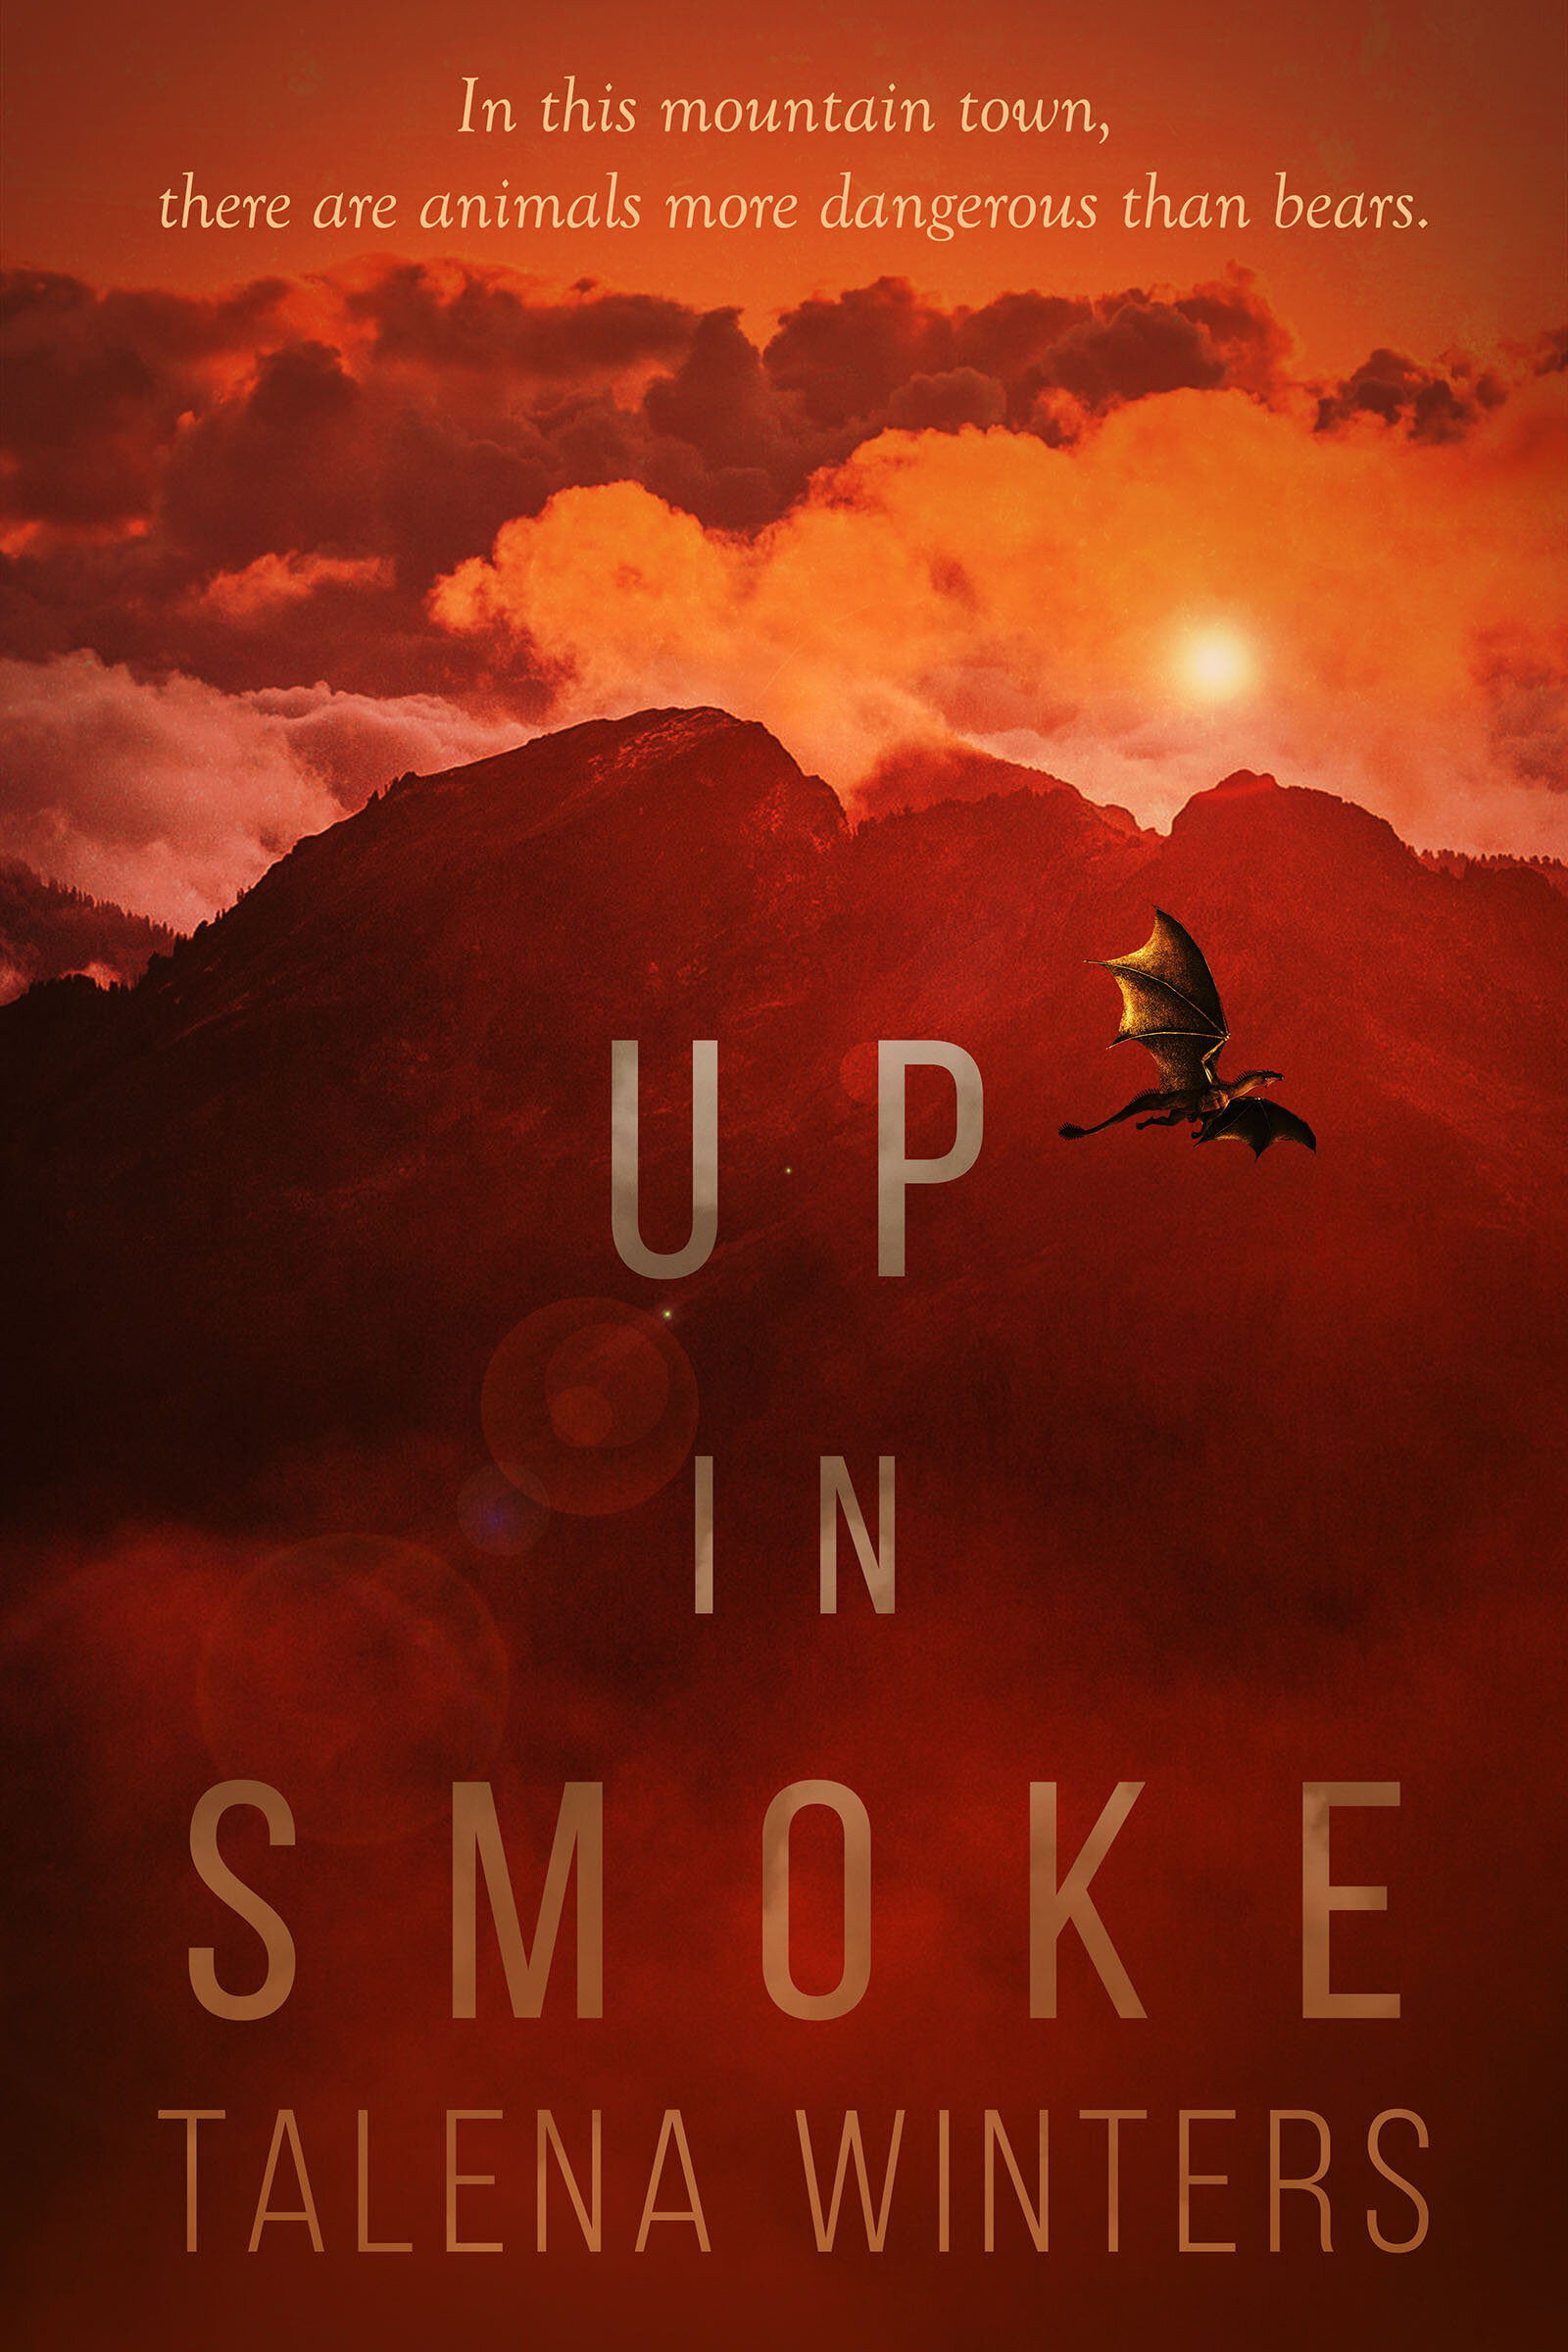 Up in Smoke book cover (Copy) (Copy)